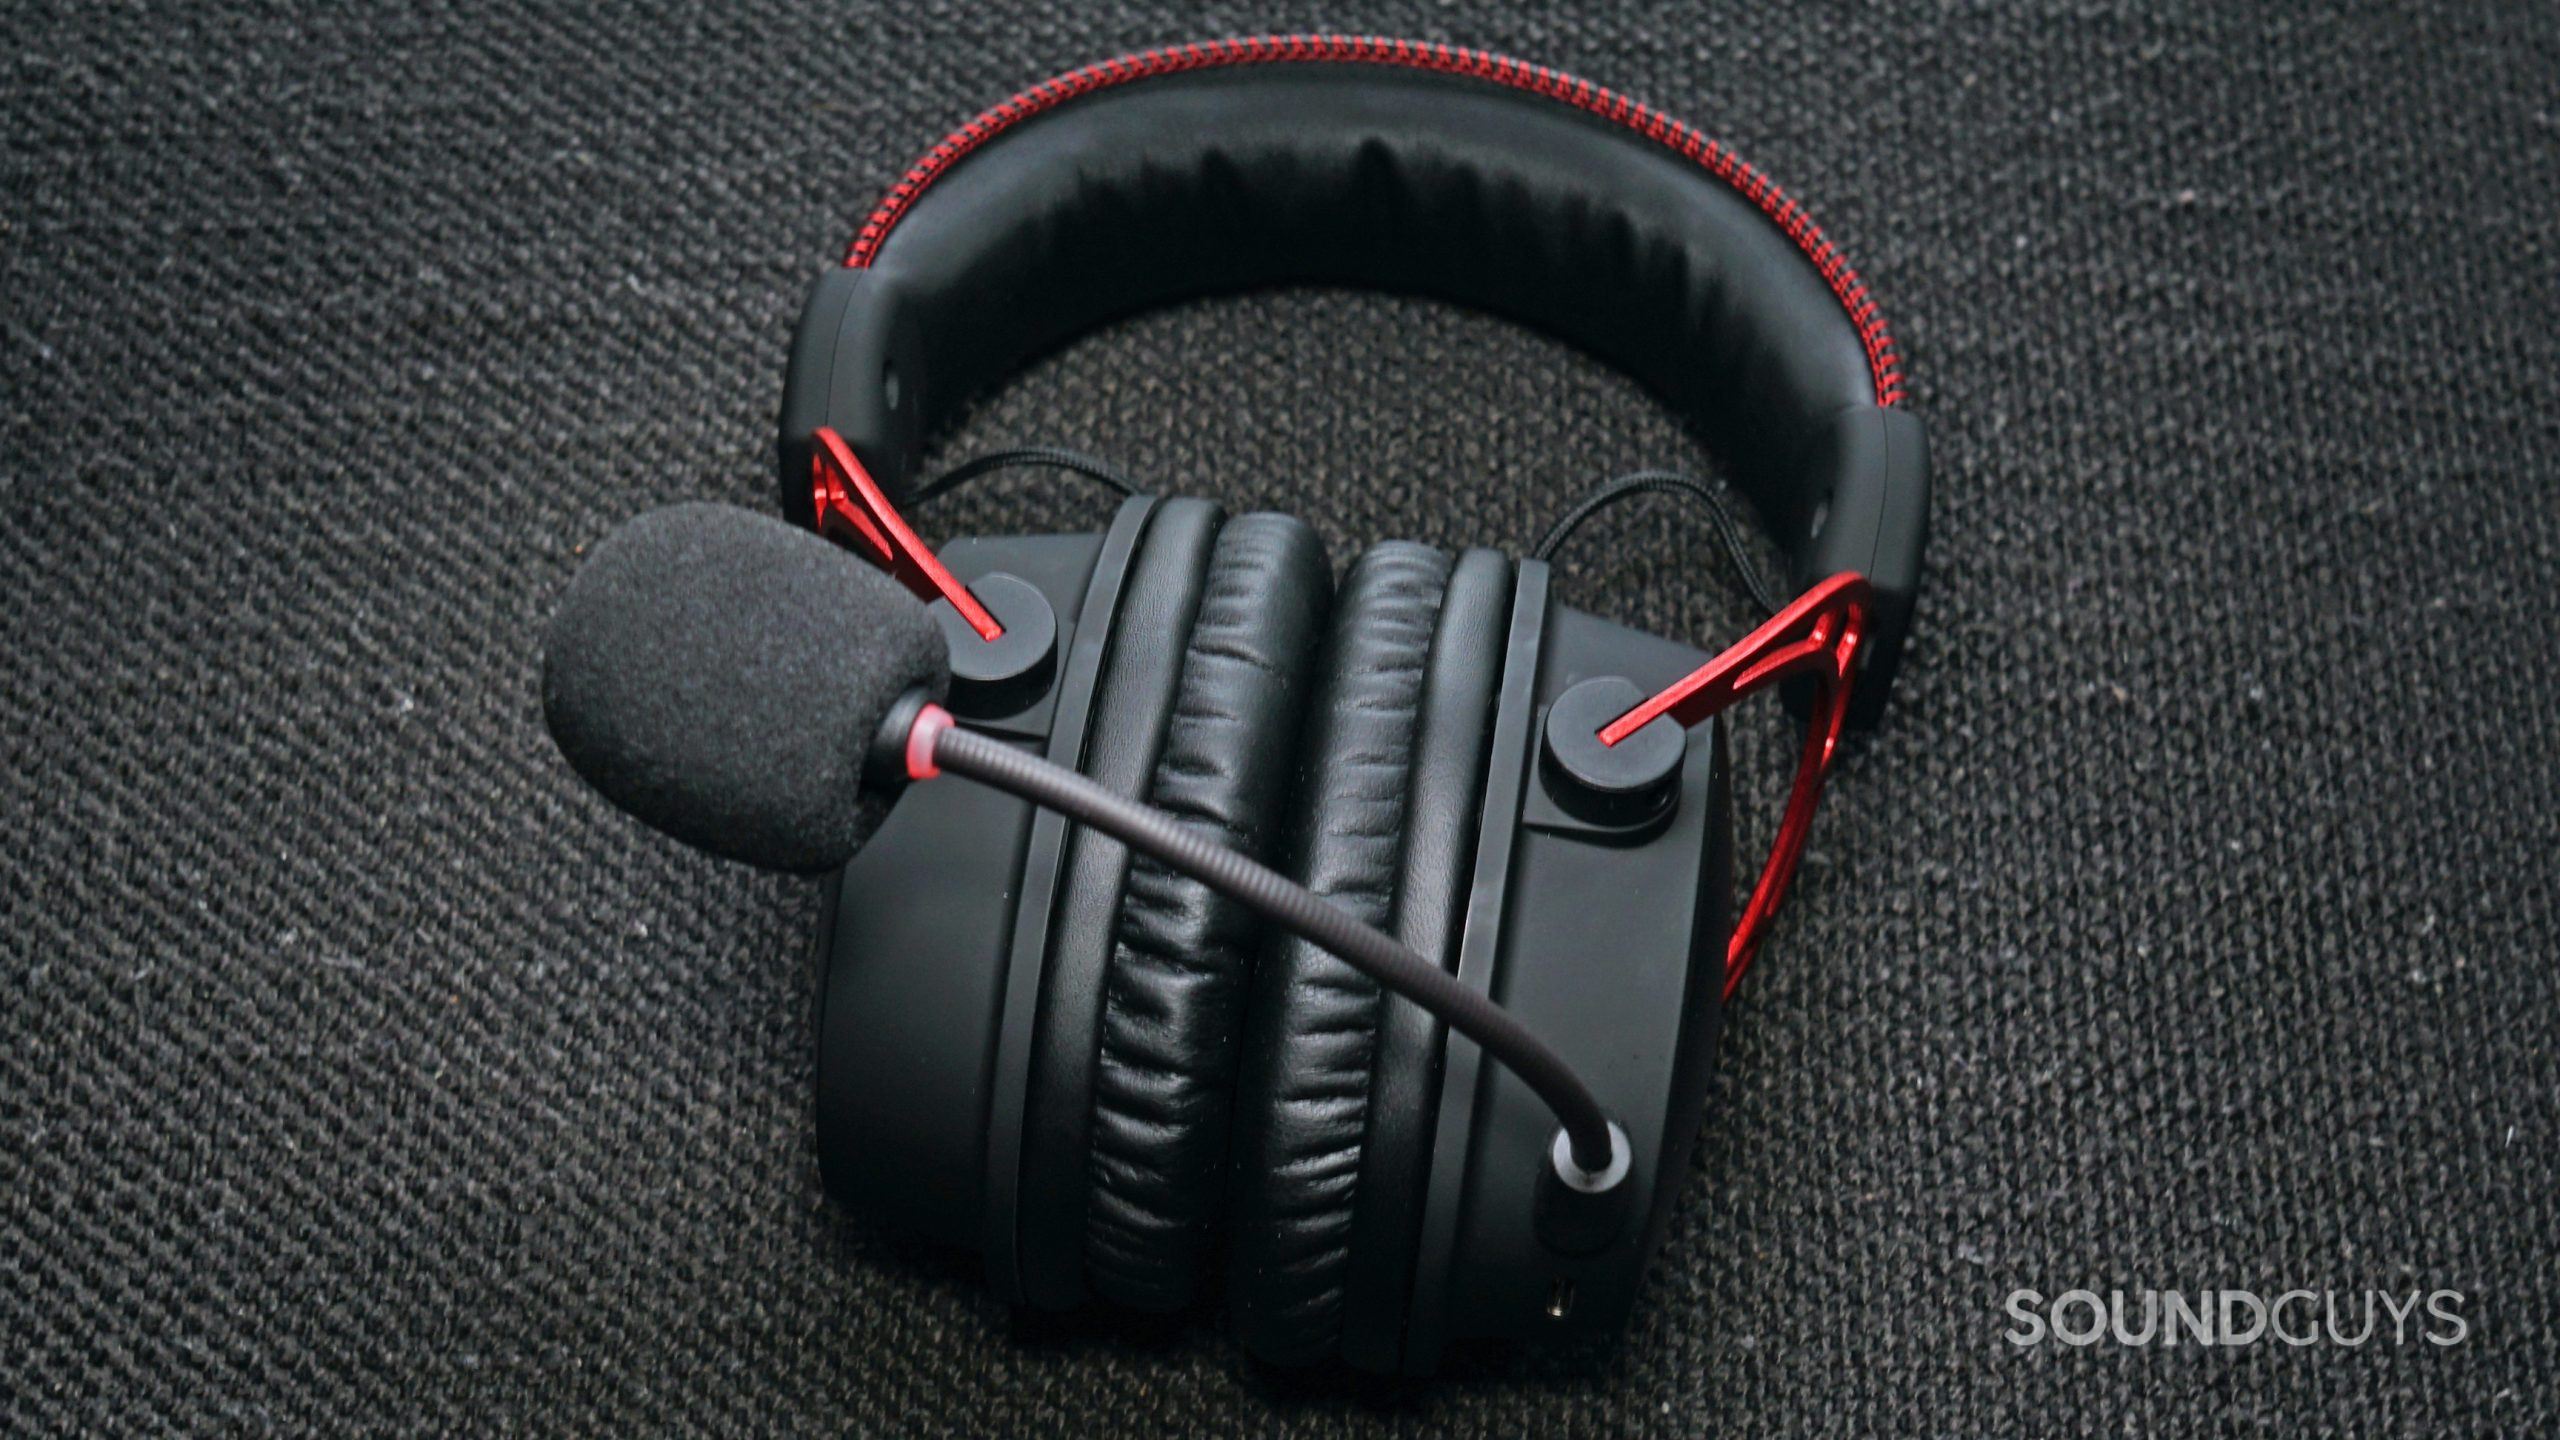 The HyperX Cloud Alpha Wireless gaming headset lays on a fabric surface